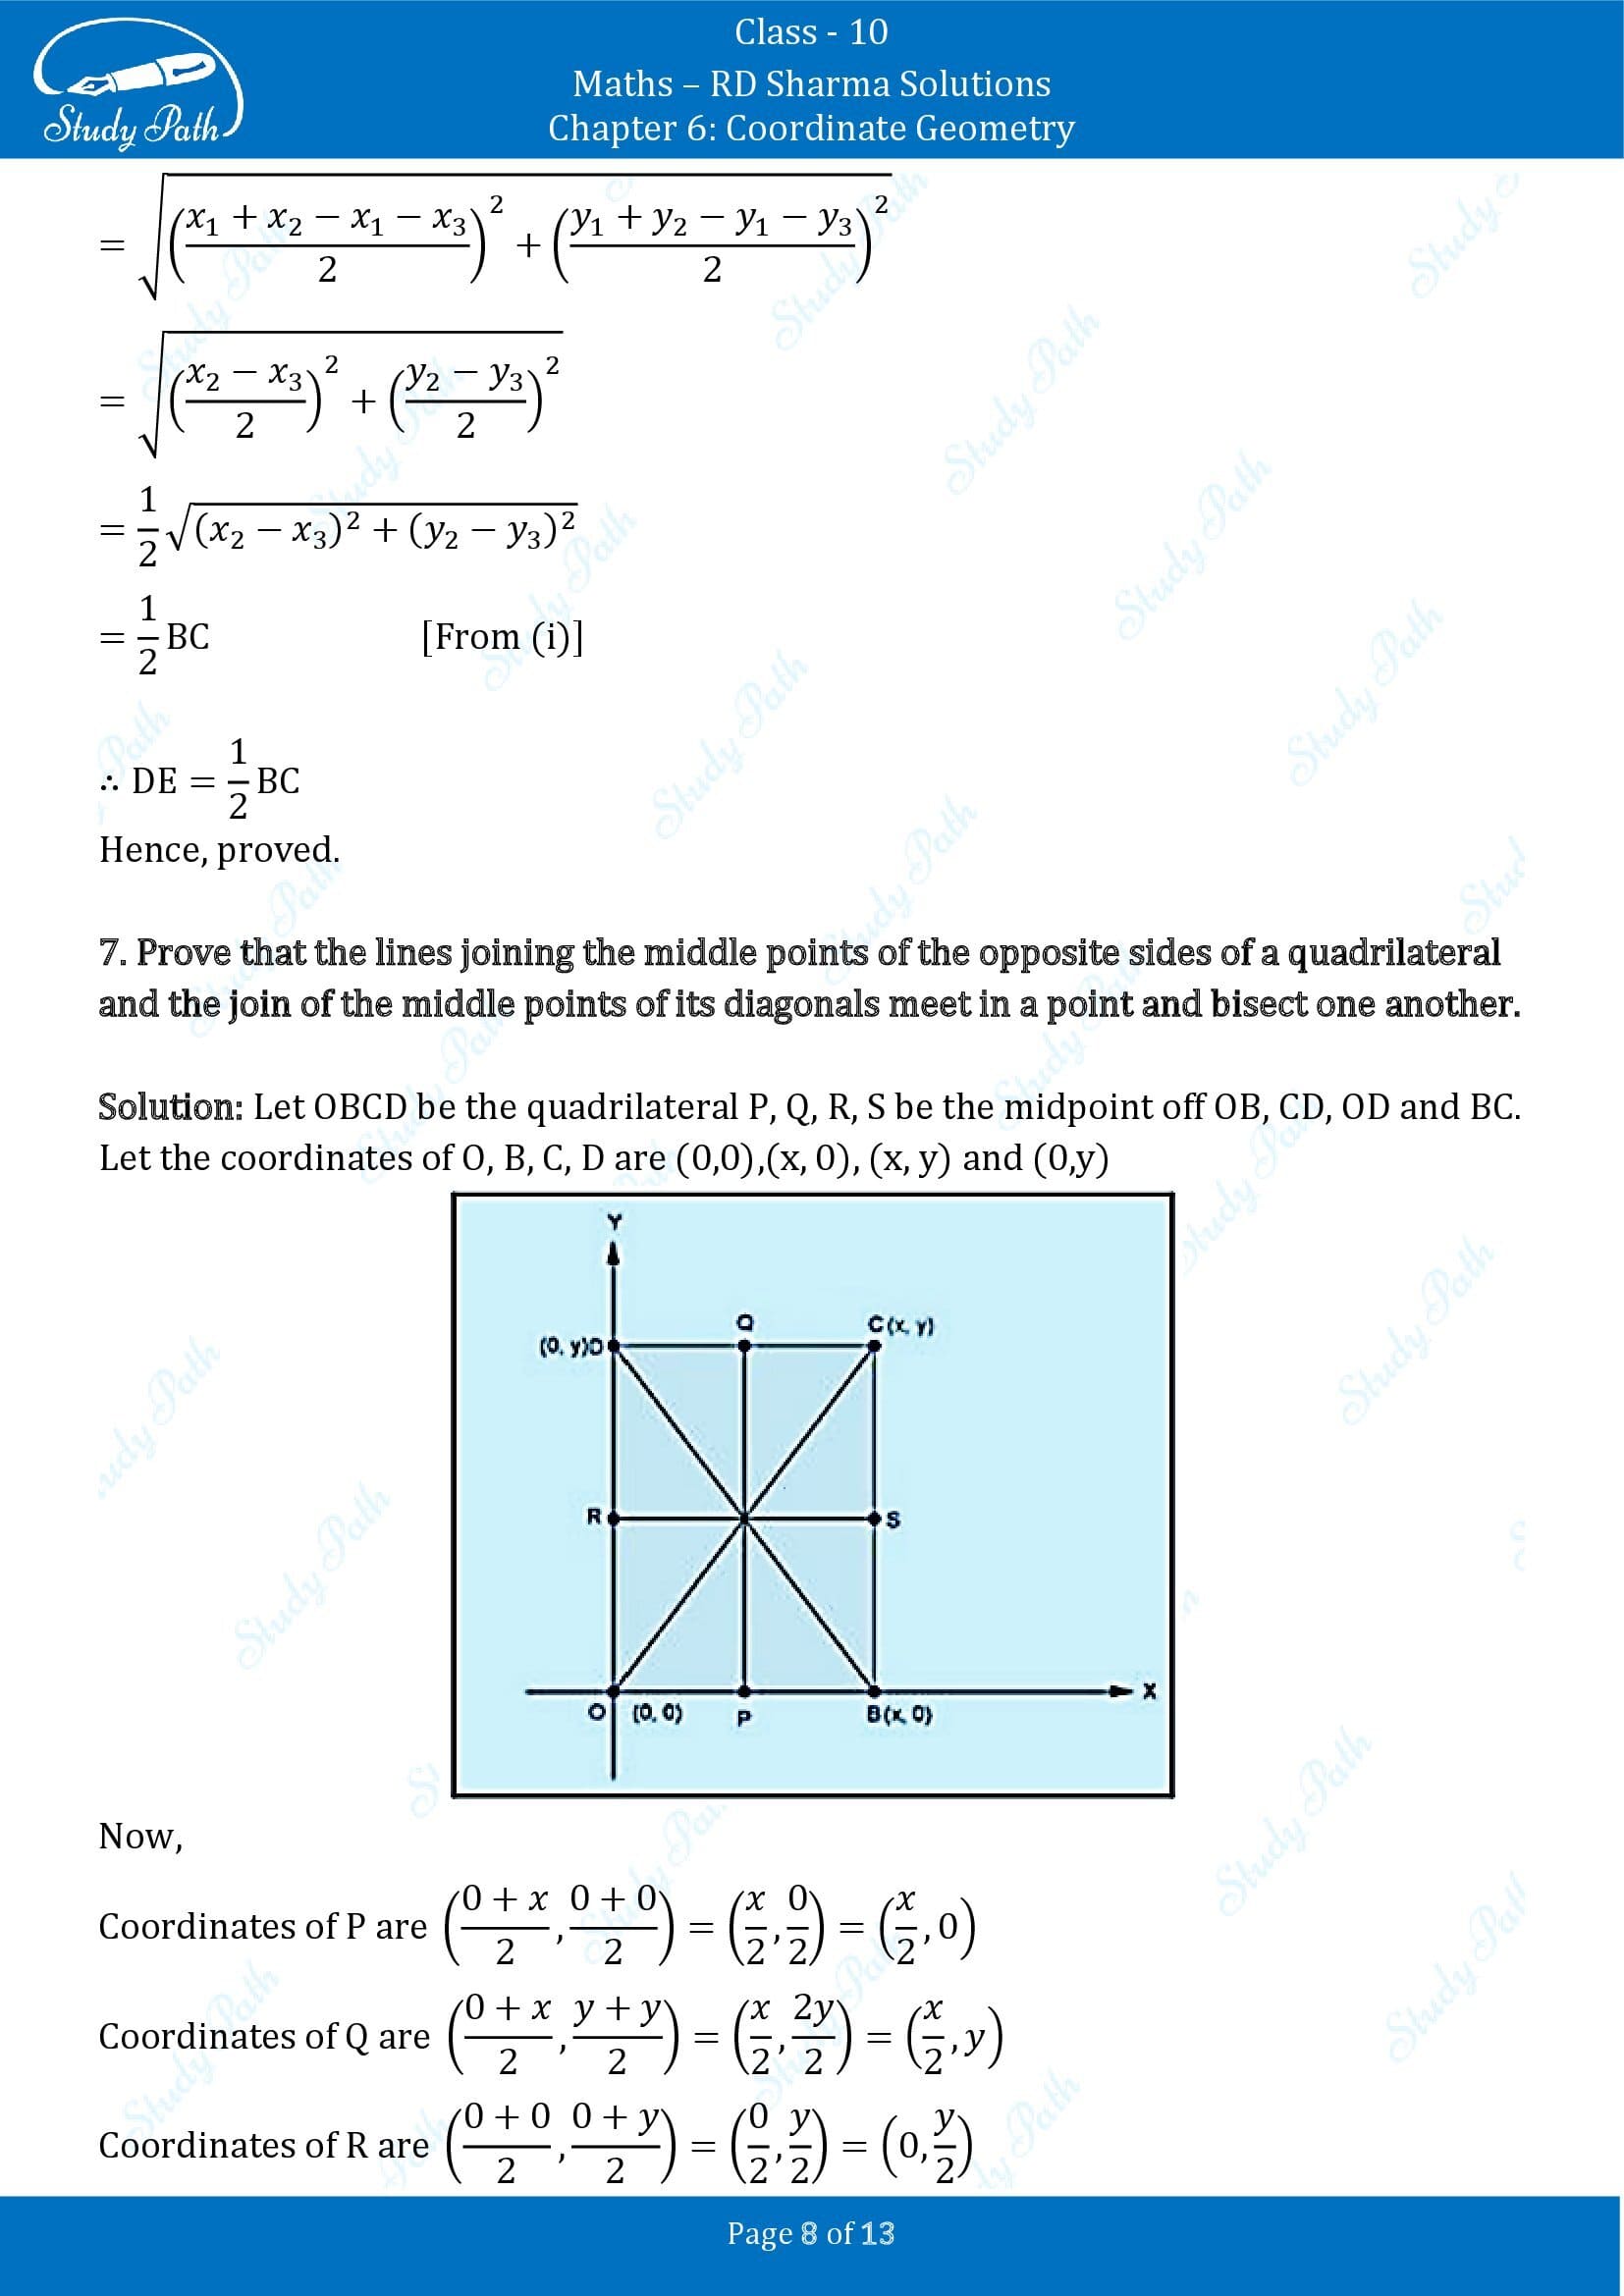 RD Sharma Solutions Class 10 Chapter 6 Coordinate Geometry Exercise 6.4 00008